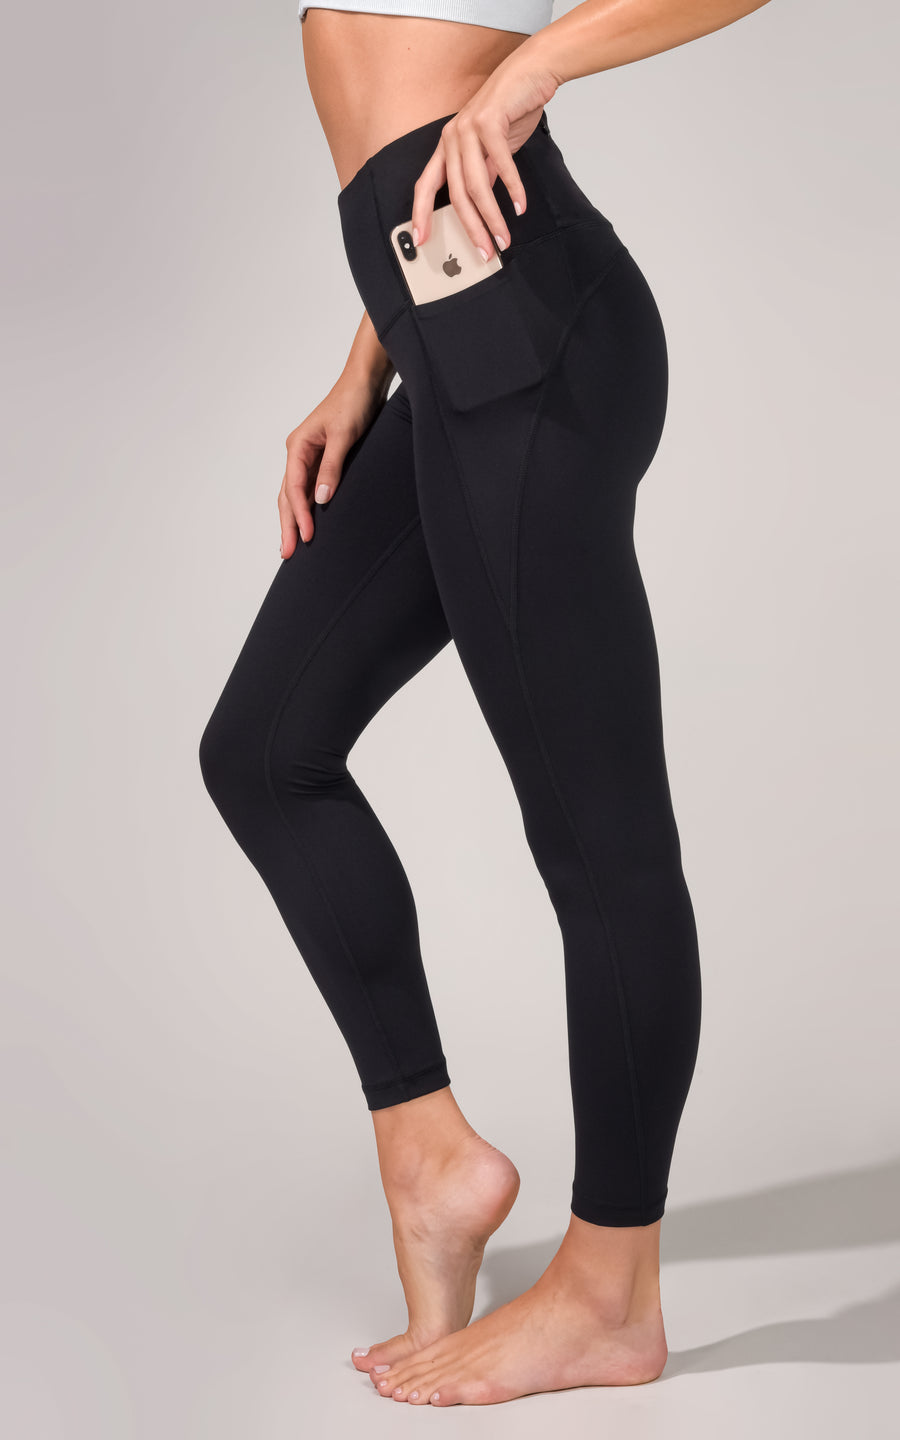 Yogalicious by Reflex Women's Lux Streamline High Waist Side Pocket Legging  - Pioneer Recycling Services